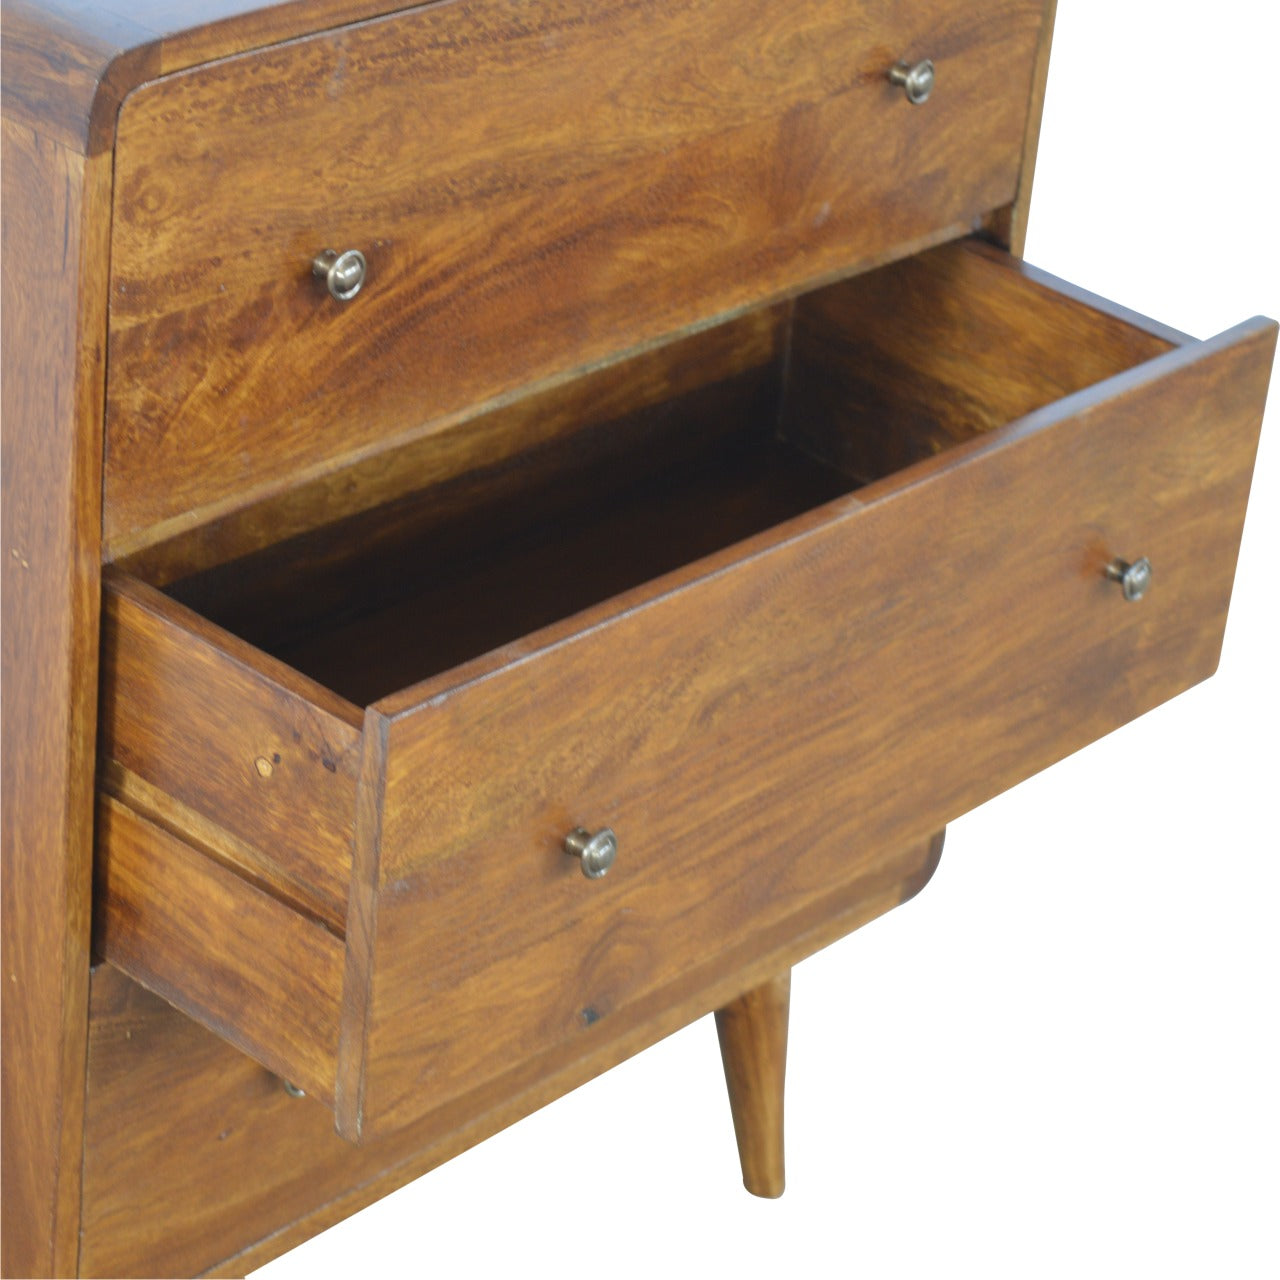 Solid Wood 3 Drawer Curved Chestnut Chest